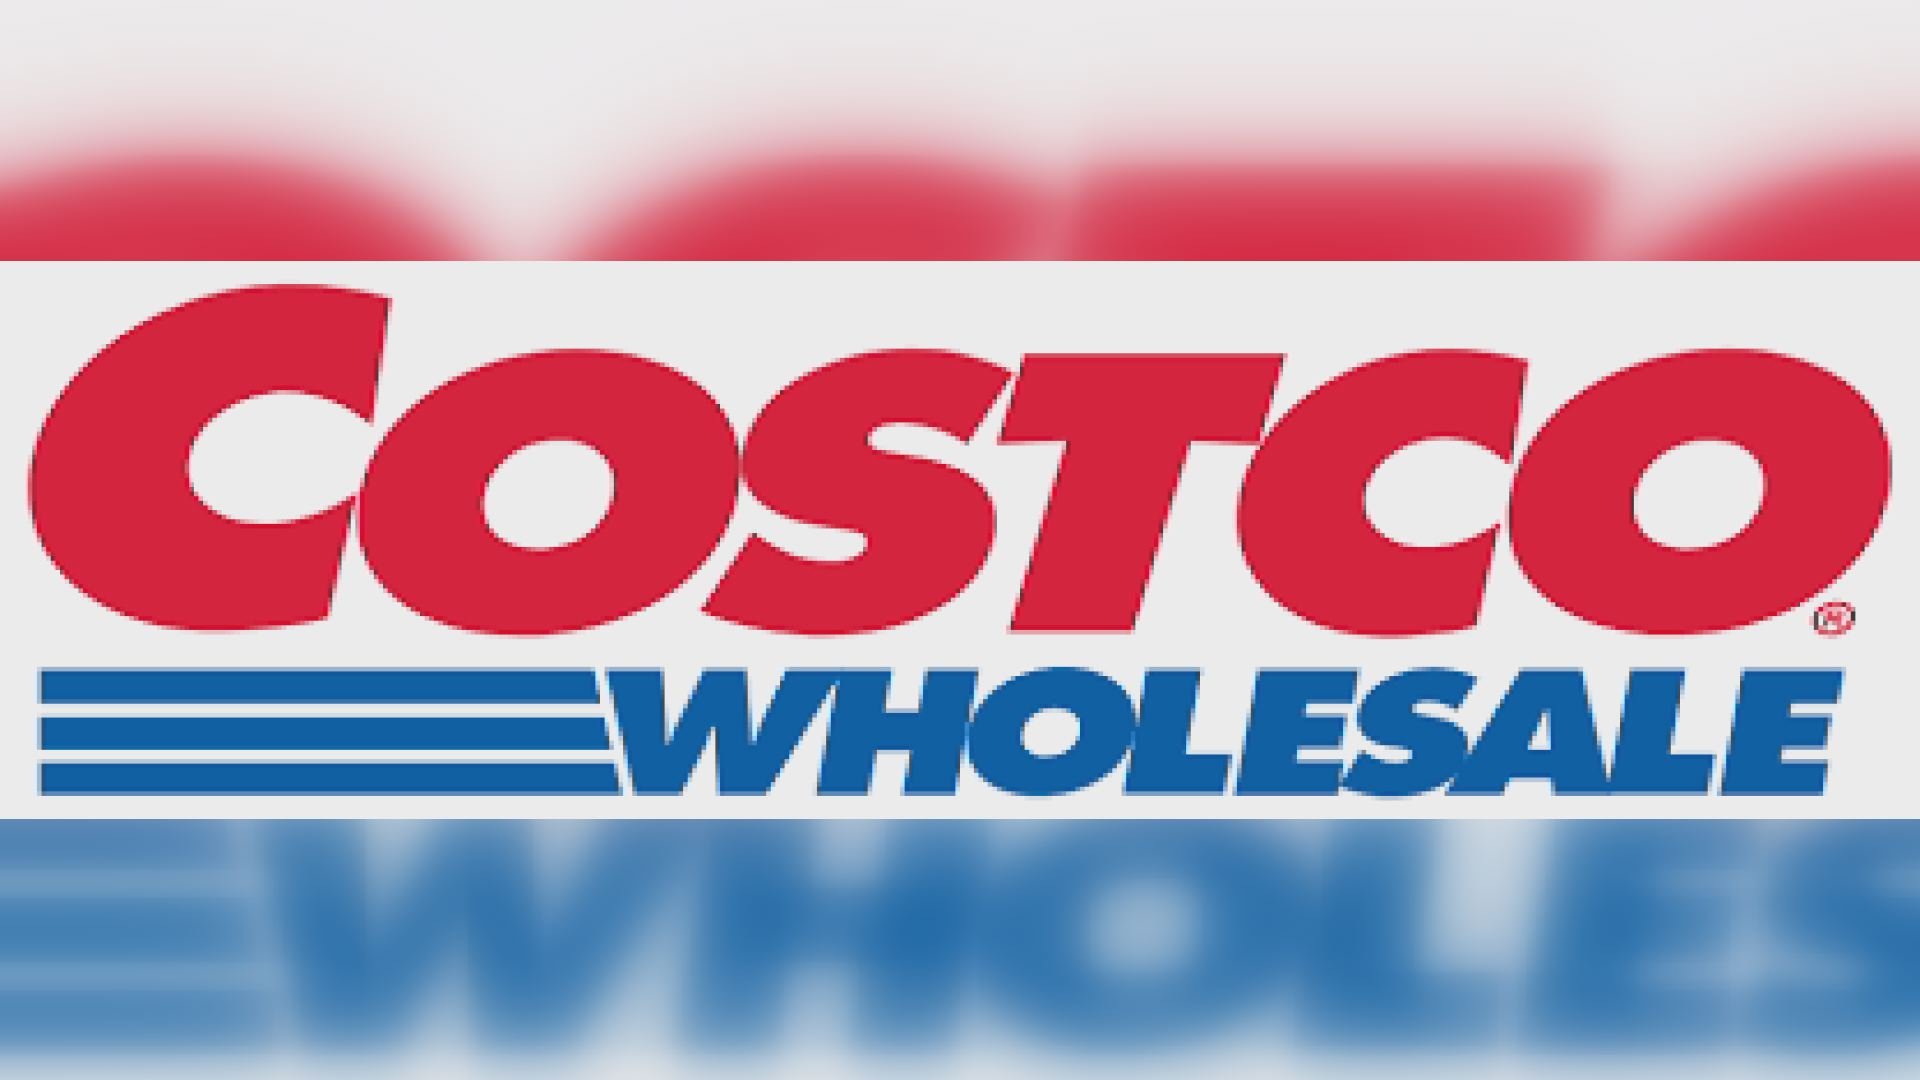 $75 Costco 'Anniversary' coupon on Facebook is a scam, company says